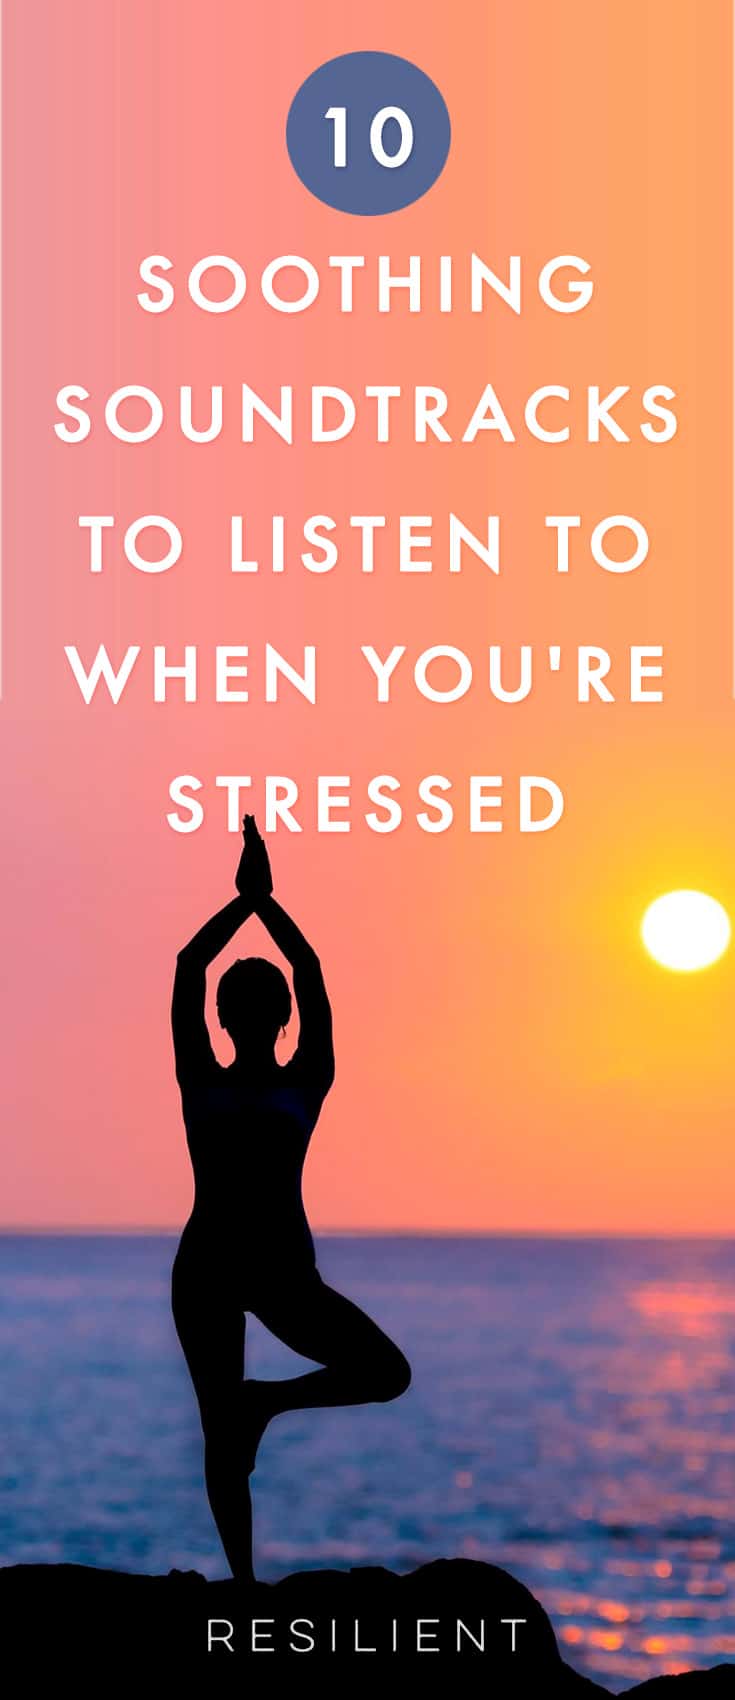 Stressed out from school or work?  Anxious about life?  Here are 10 soundtracks to listen to when you're stressed to help calm you down. :)  Nice and peaceful.